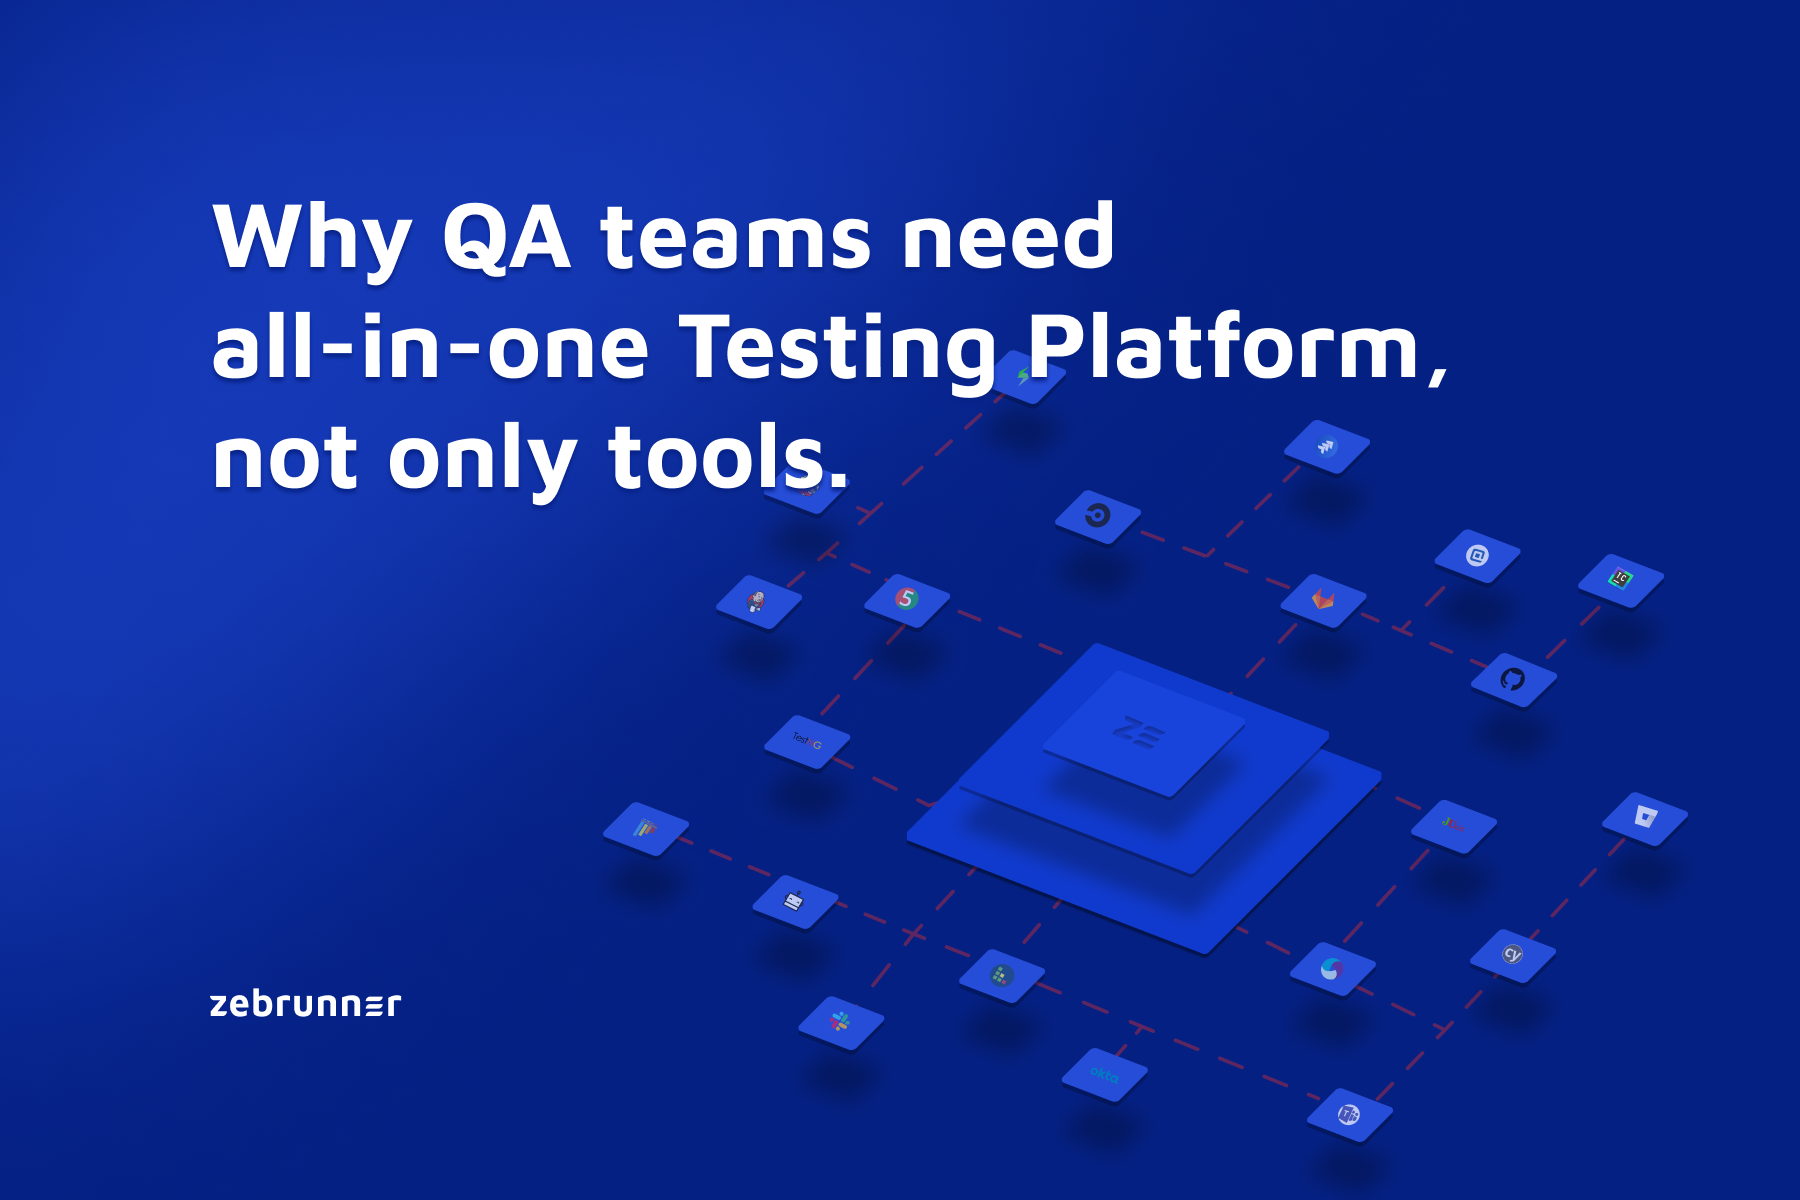 QA Teams Need All-in-One Data Analytics Platforms for Testing